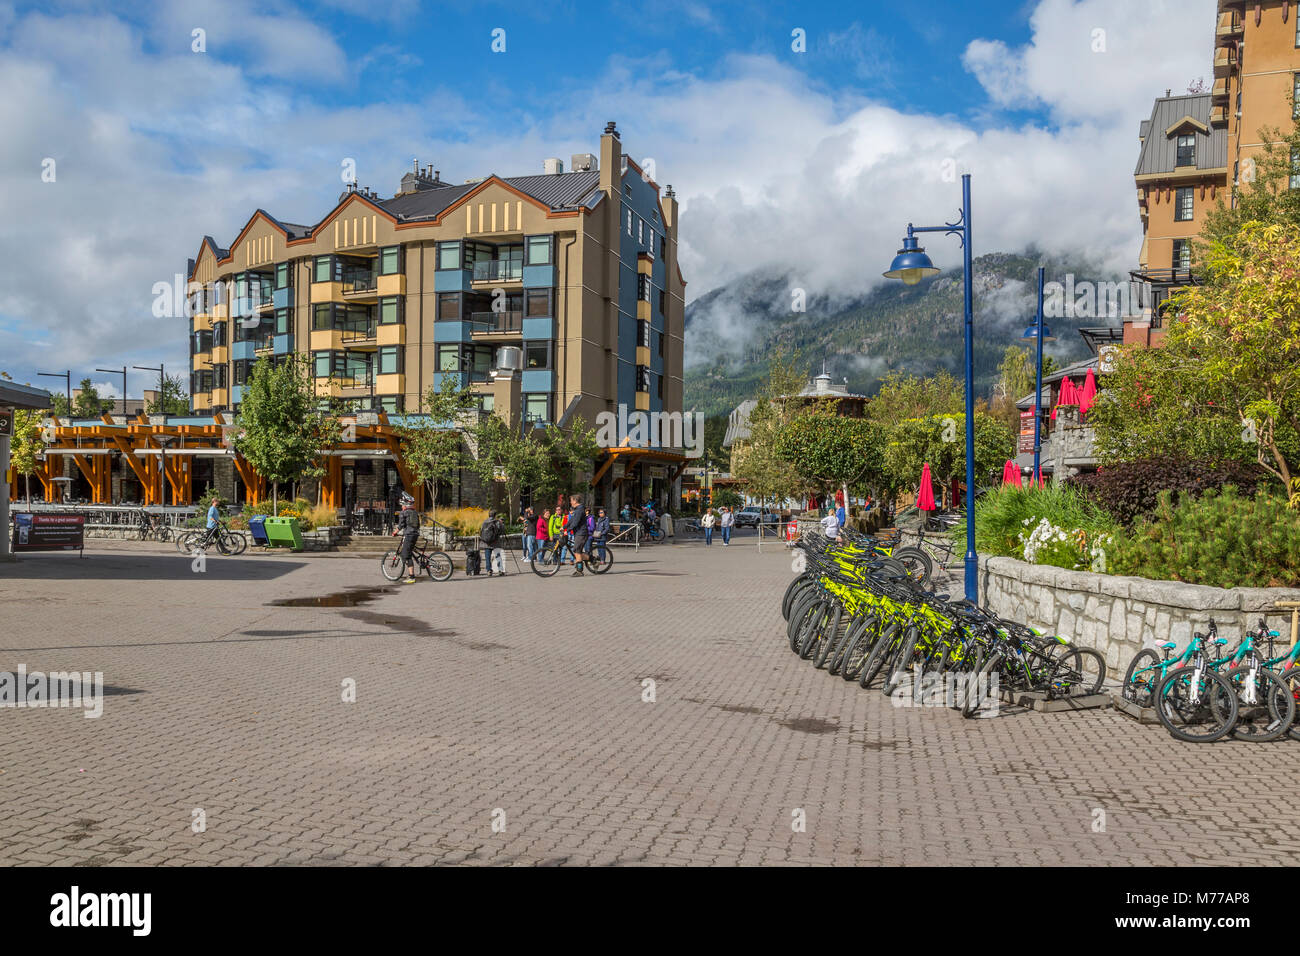 Cycles and shops aligning Skiers Plaza, Whistler Village, British Columbia, Canada, North America Stock Photo